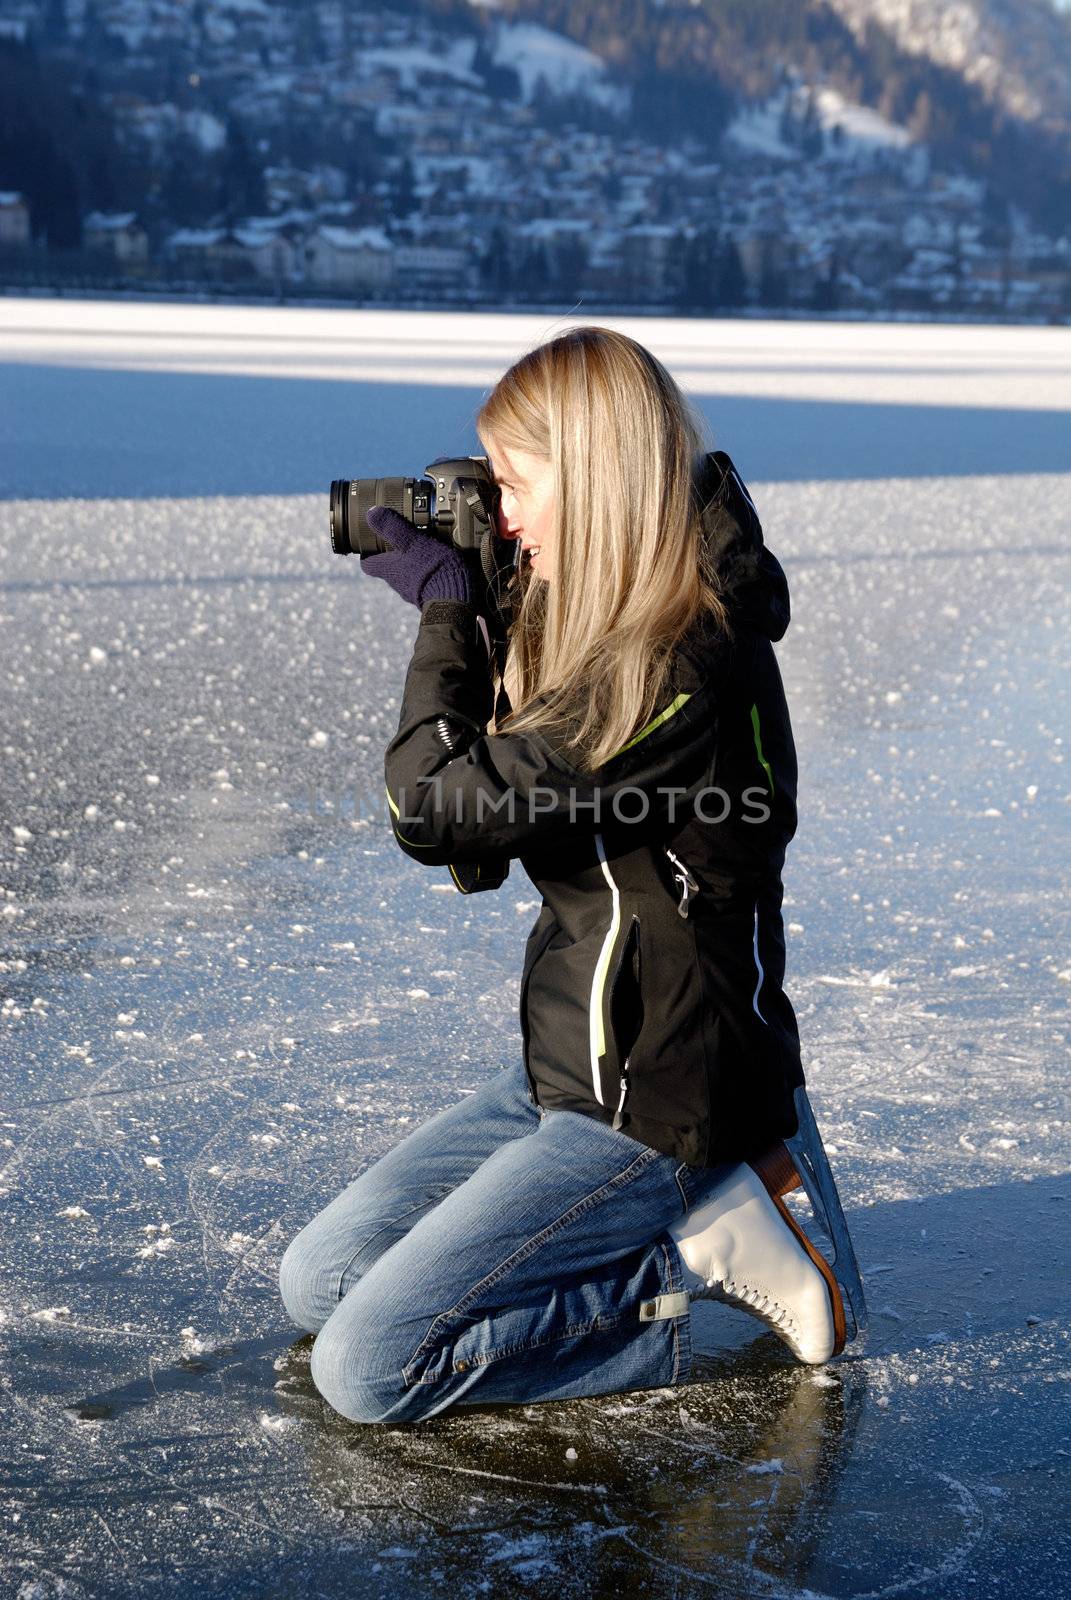 Paparazzi on ice by fahrner